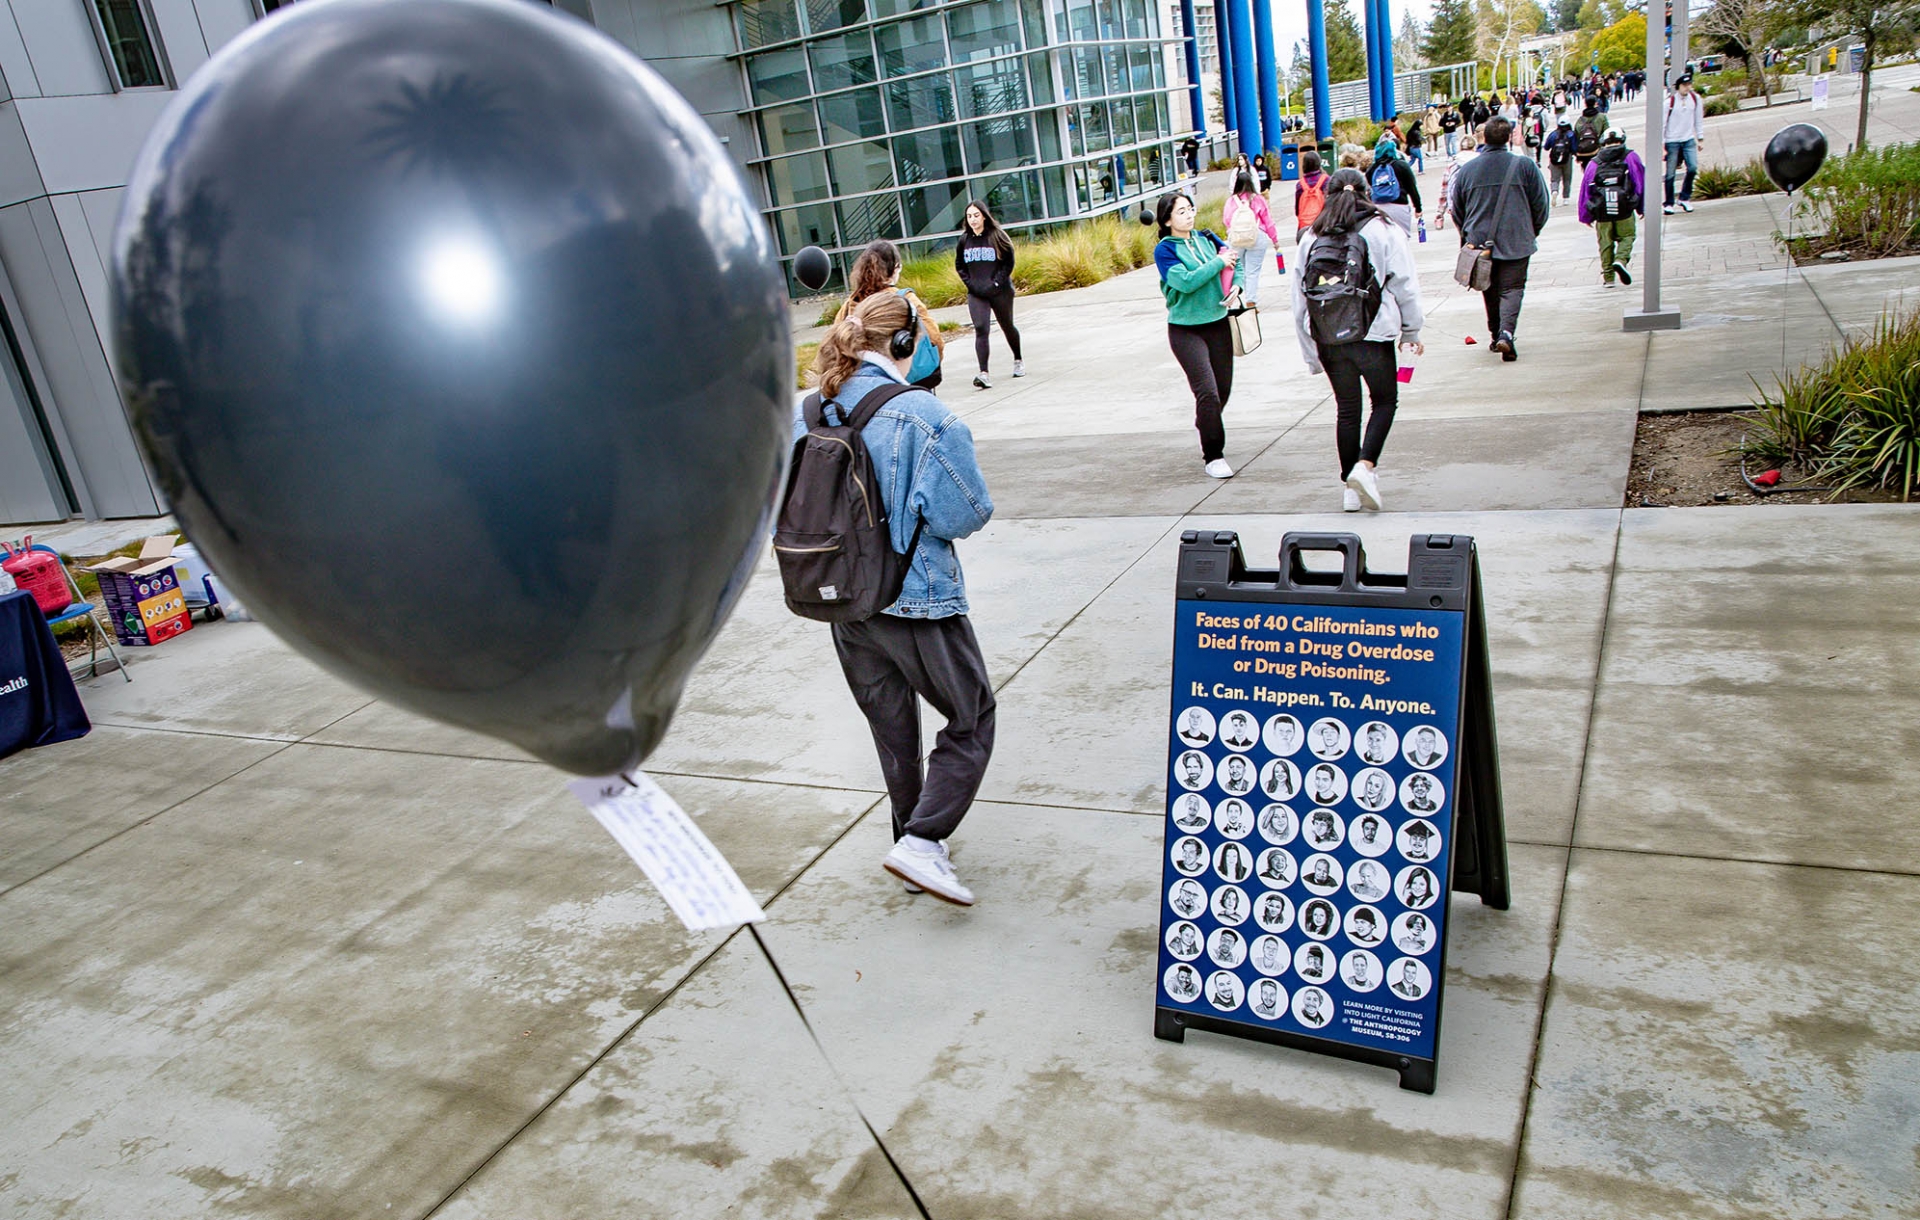 Black Balloon Day on March 6 was presented as part of the CSUSB Anthropology Museum’s INTO LIGHT exhibition, which shares the stories of 41 individuals who lost their lives to a drug overdose or drug poisoning. The exhibit will run through June 10.